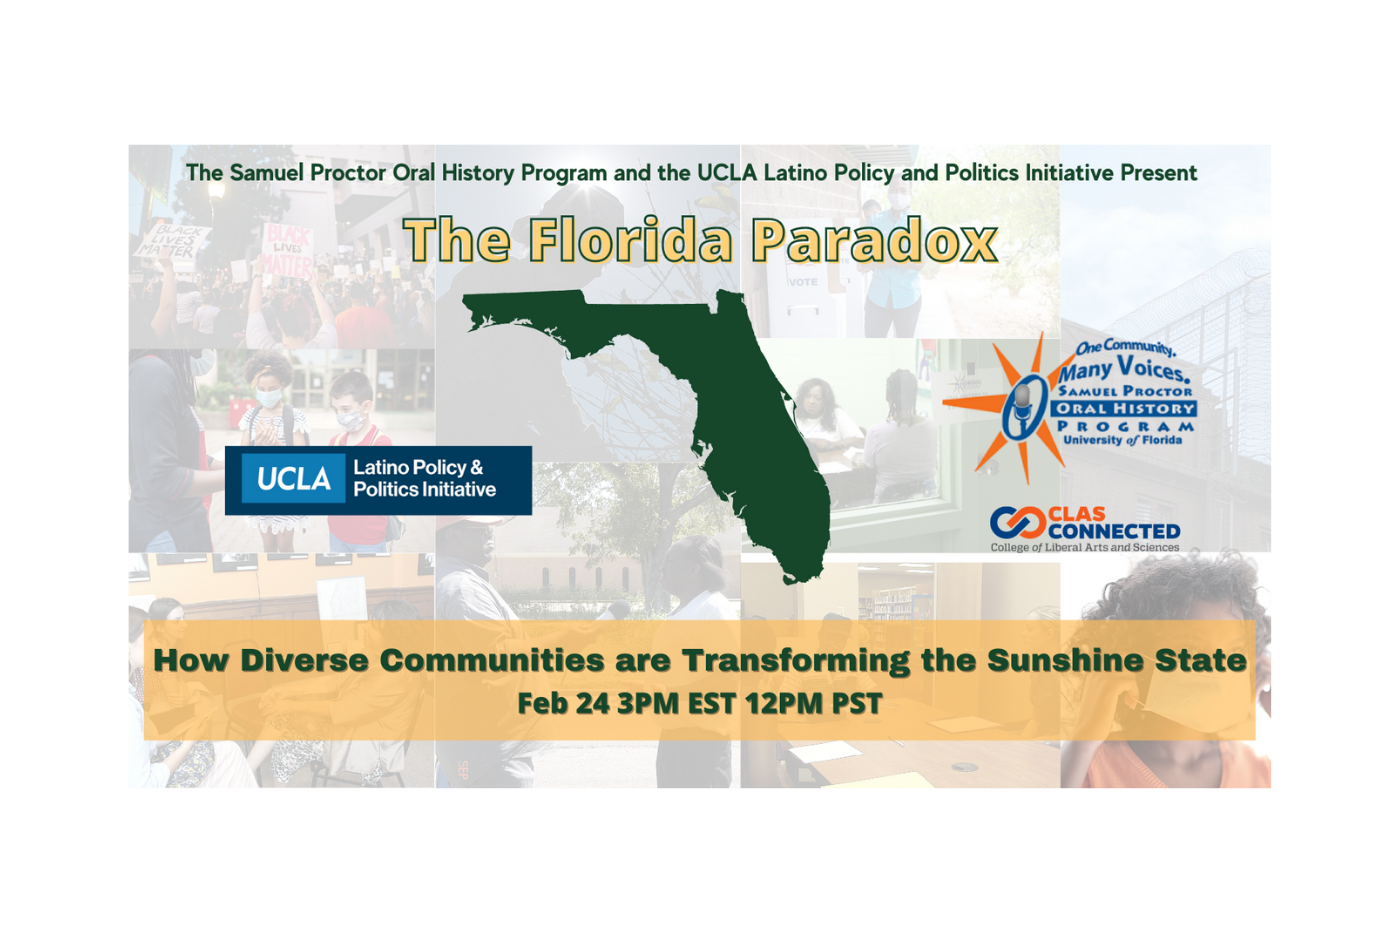 The Florida Paradox: Community Organizing and the Future of the Sunshine State